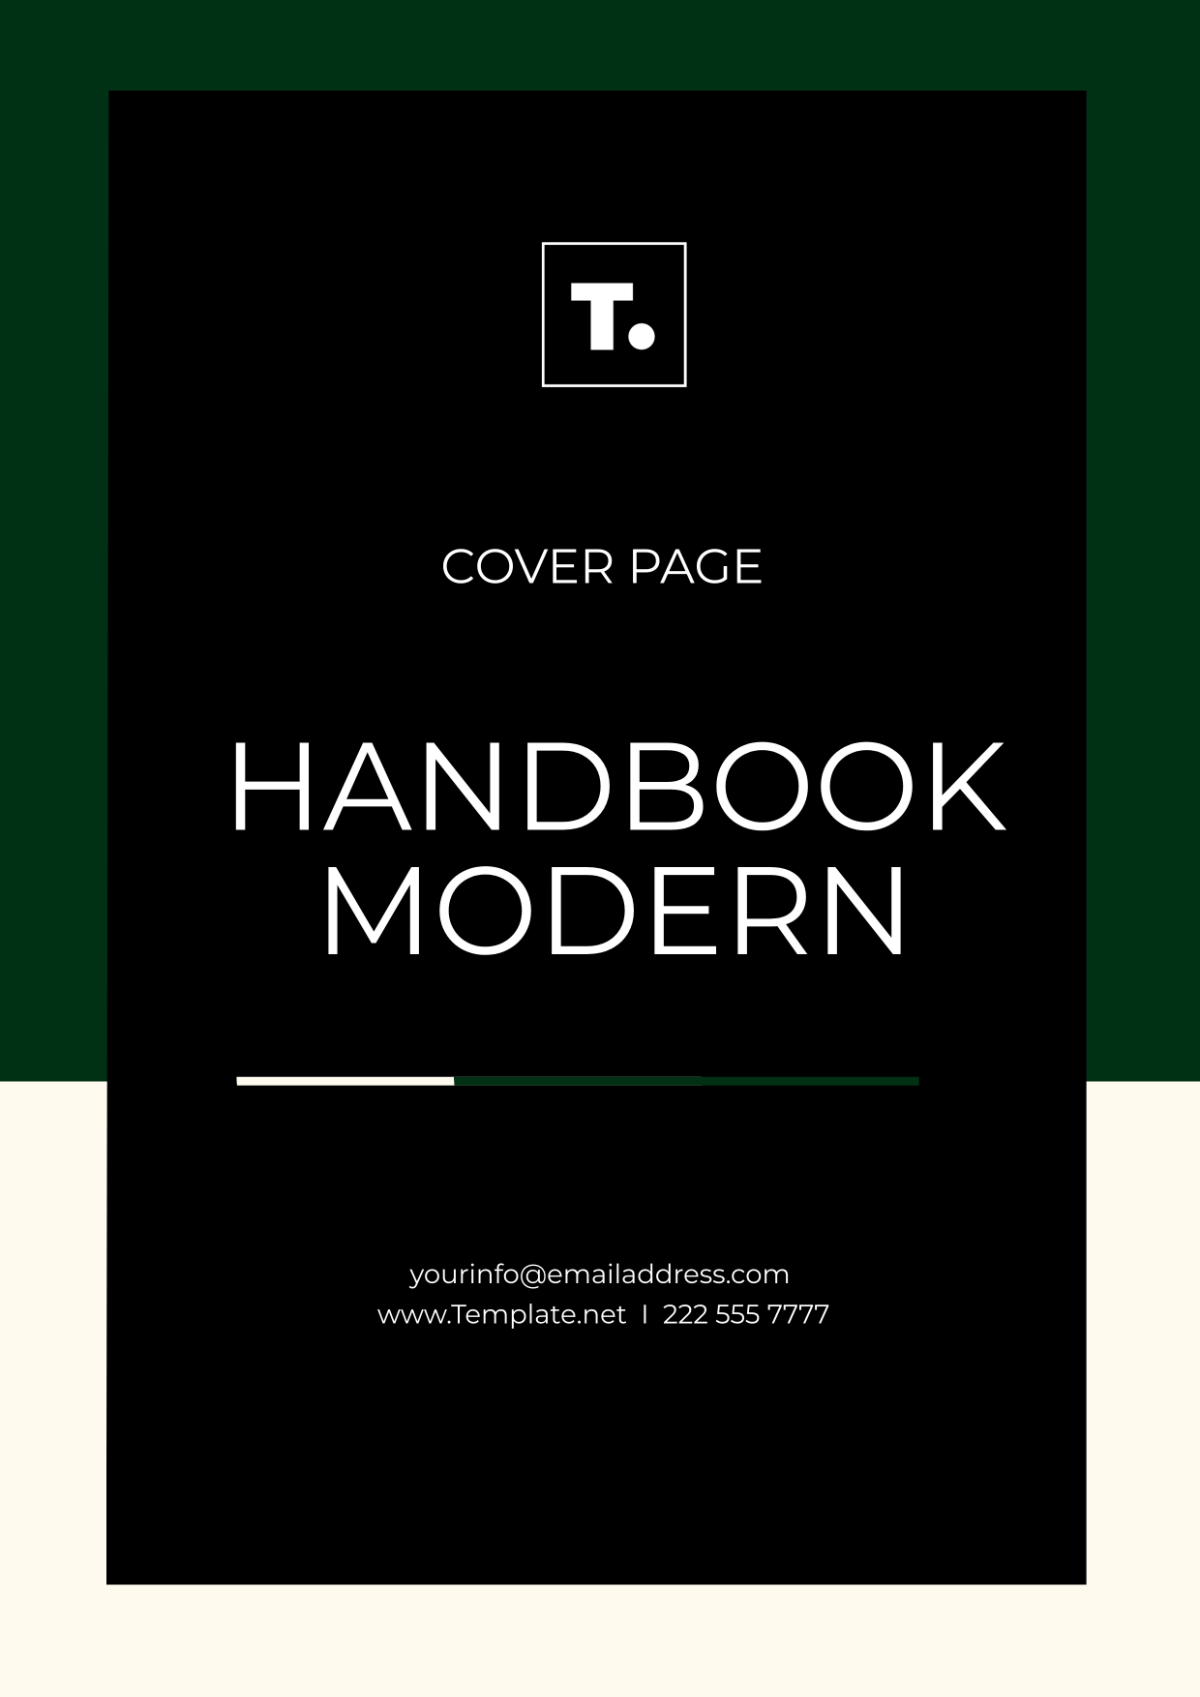 Handbook Modern Cover Page Template